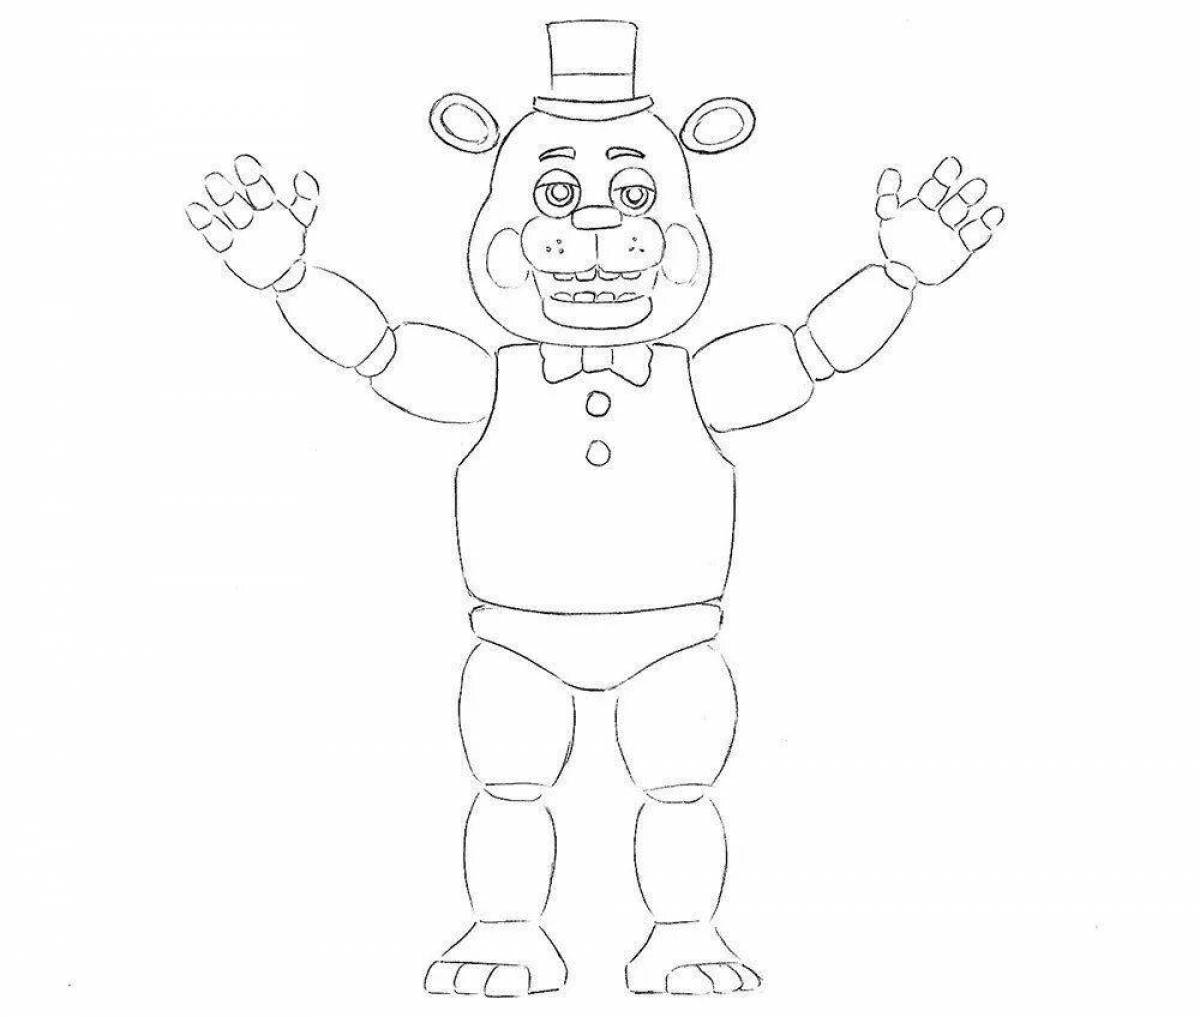 Golden freddy holiday coloring page